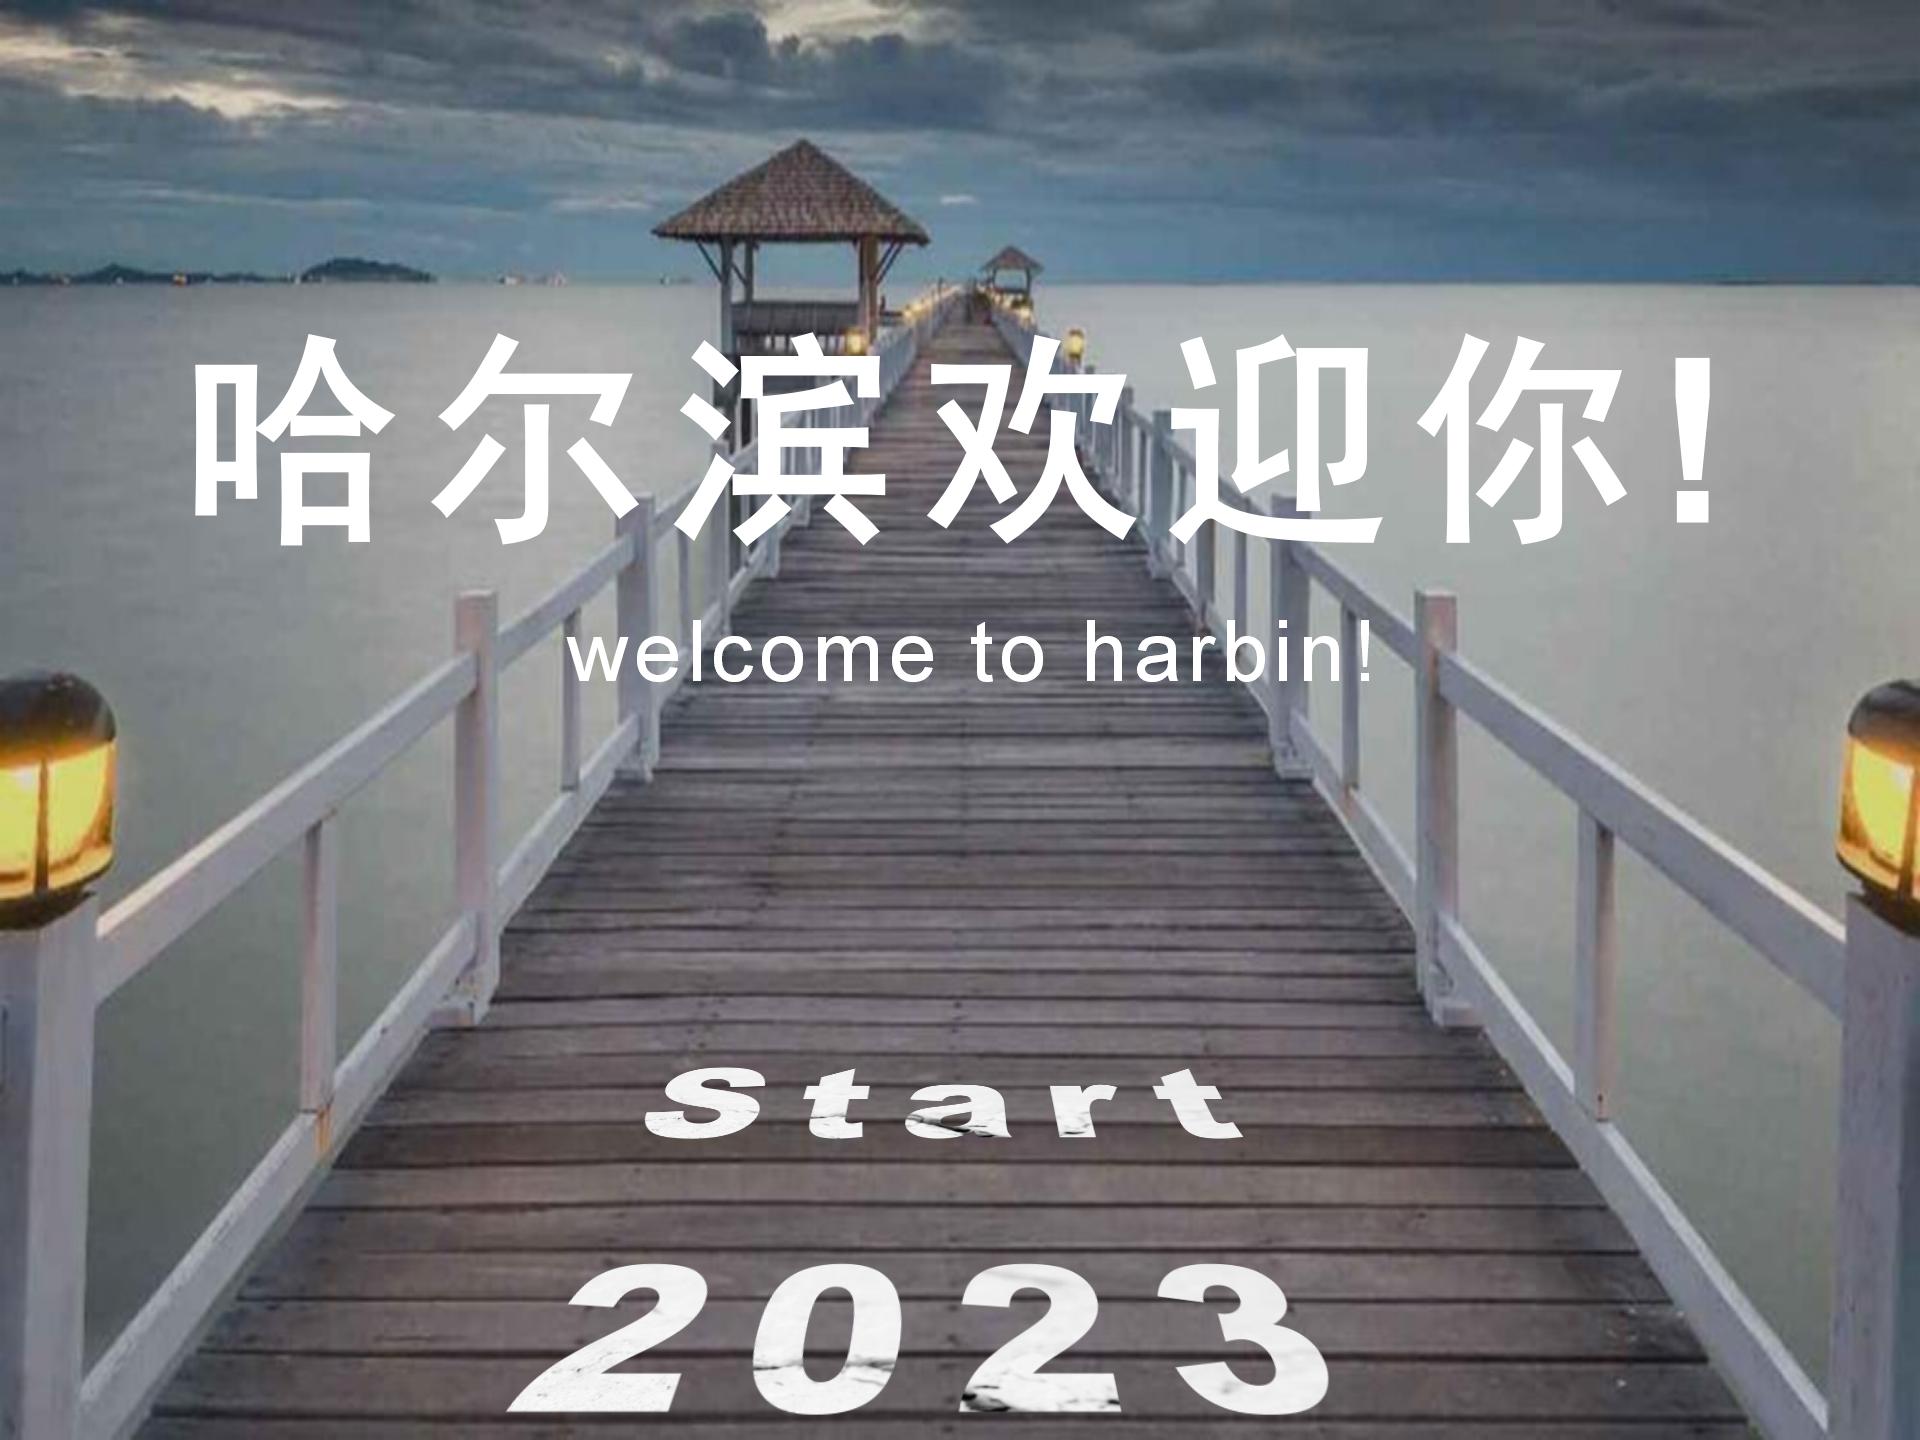 welcome to Harbin